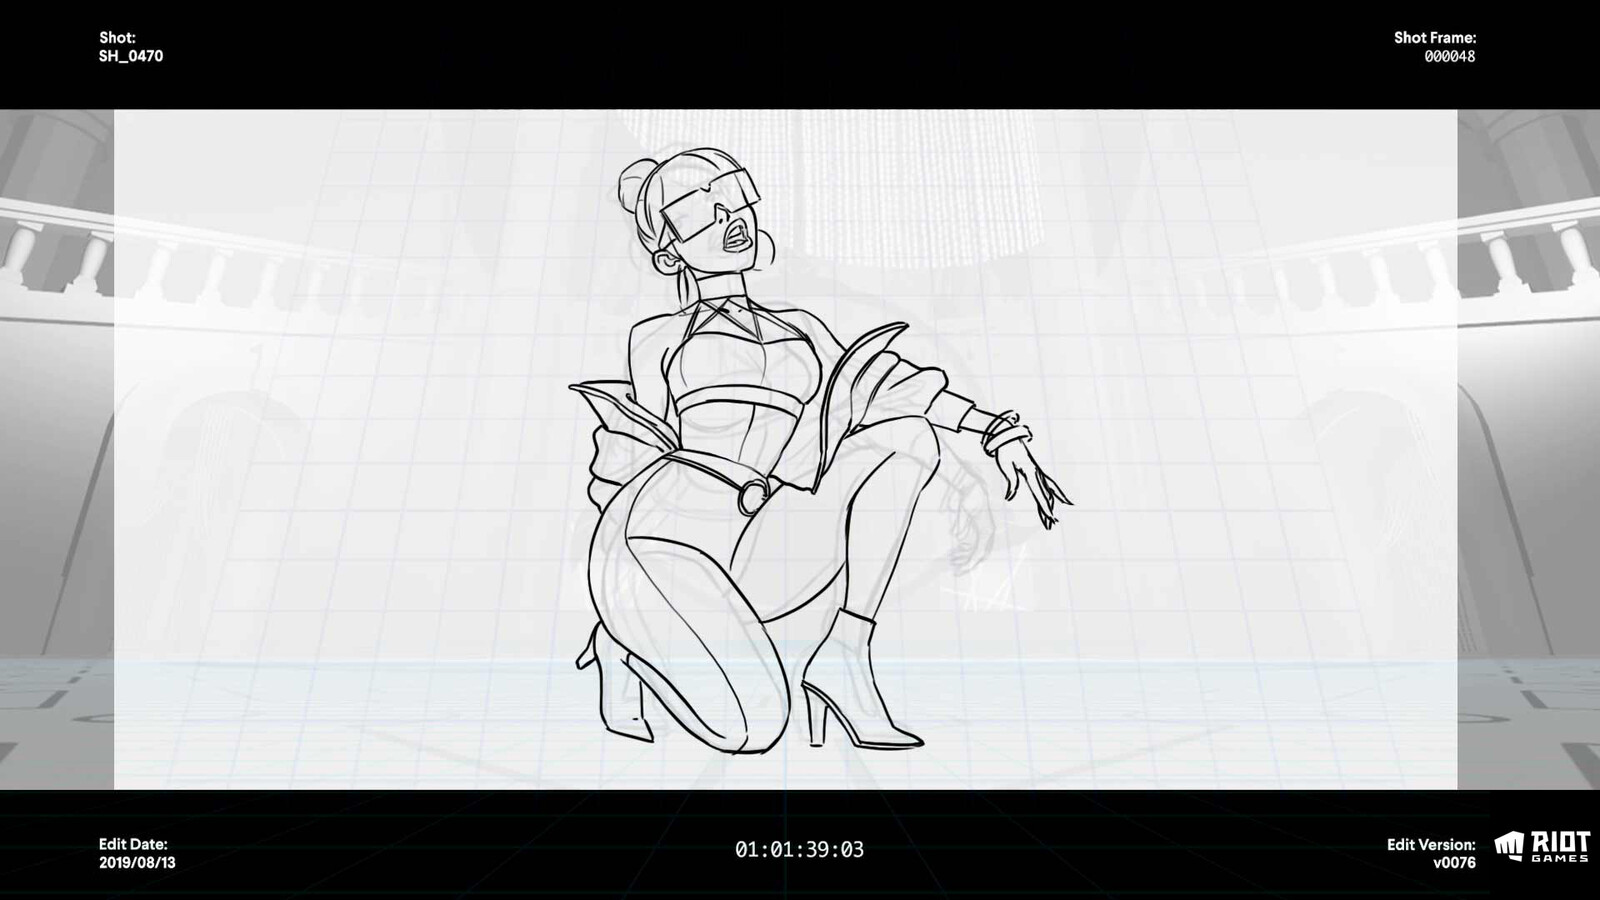 Pose key frame for the video.